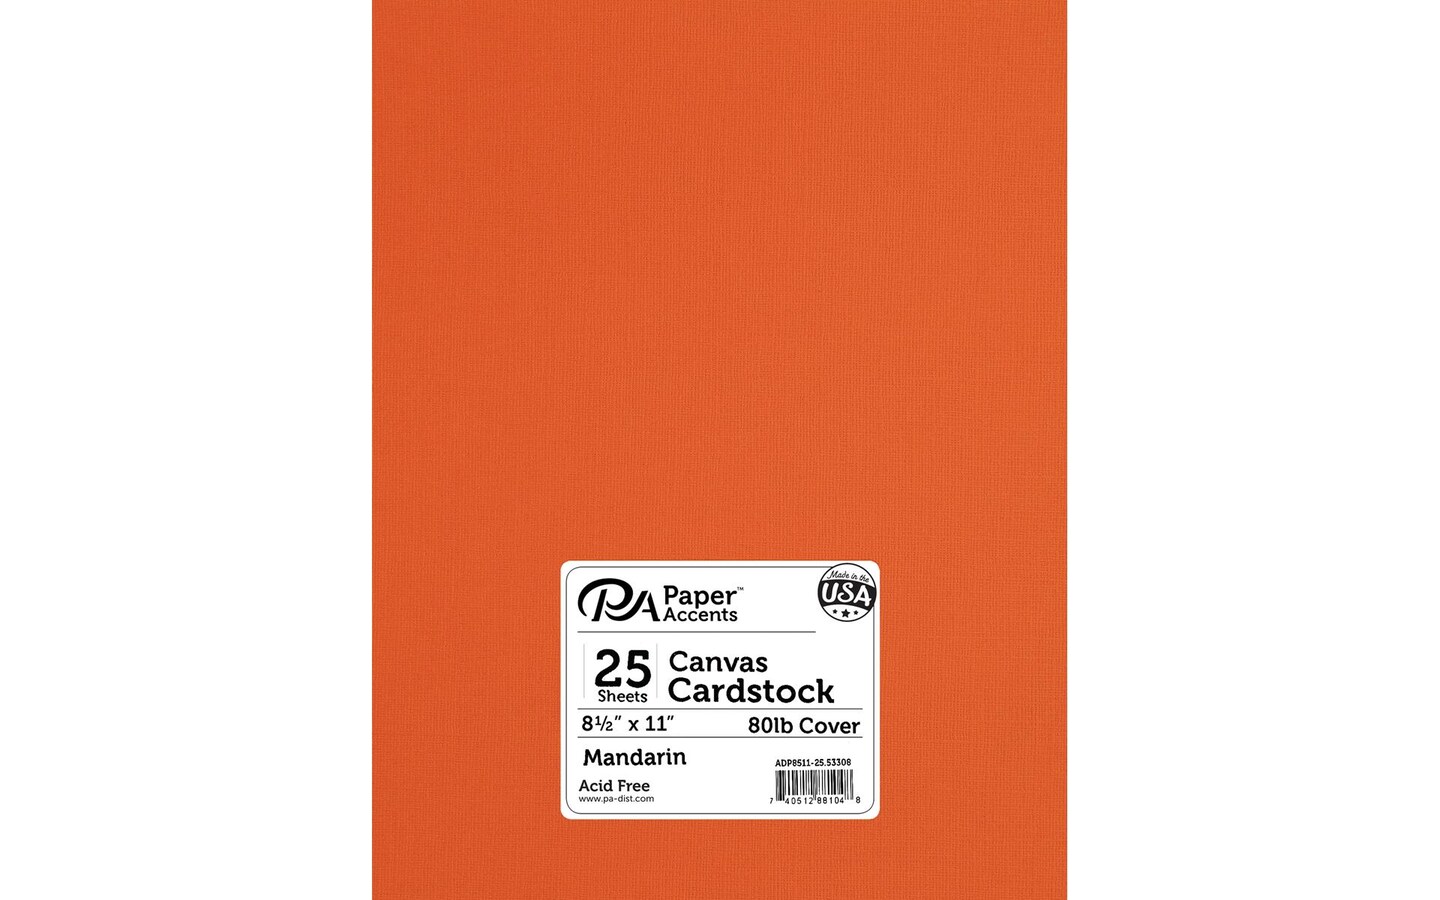 PA Paper Accents Canvas Cardstock 8.5&#x22; x 11&#x22; Mandarin, 80lb colored cardstock paper for card making, scrapbooking, printing, quilling and crafts, 25 piece pack